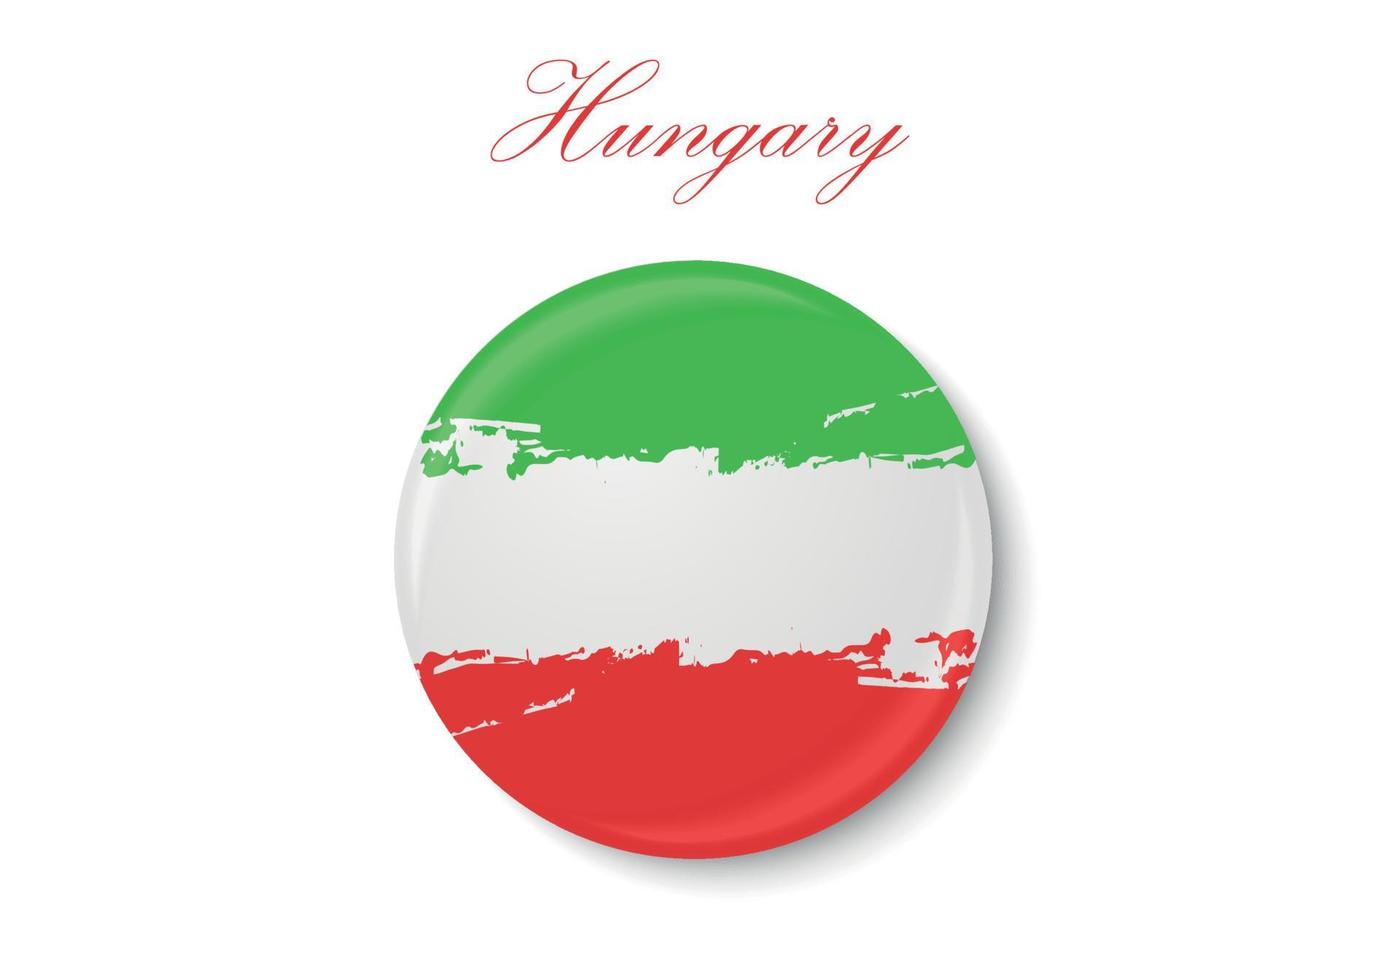 The flag of Hungary. Standard color. The circular icon. The round flag. Digital illustration. Computer illustration. Vector illustration.